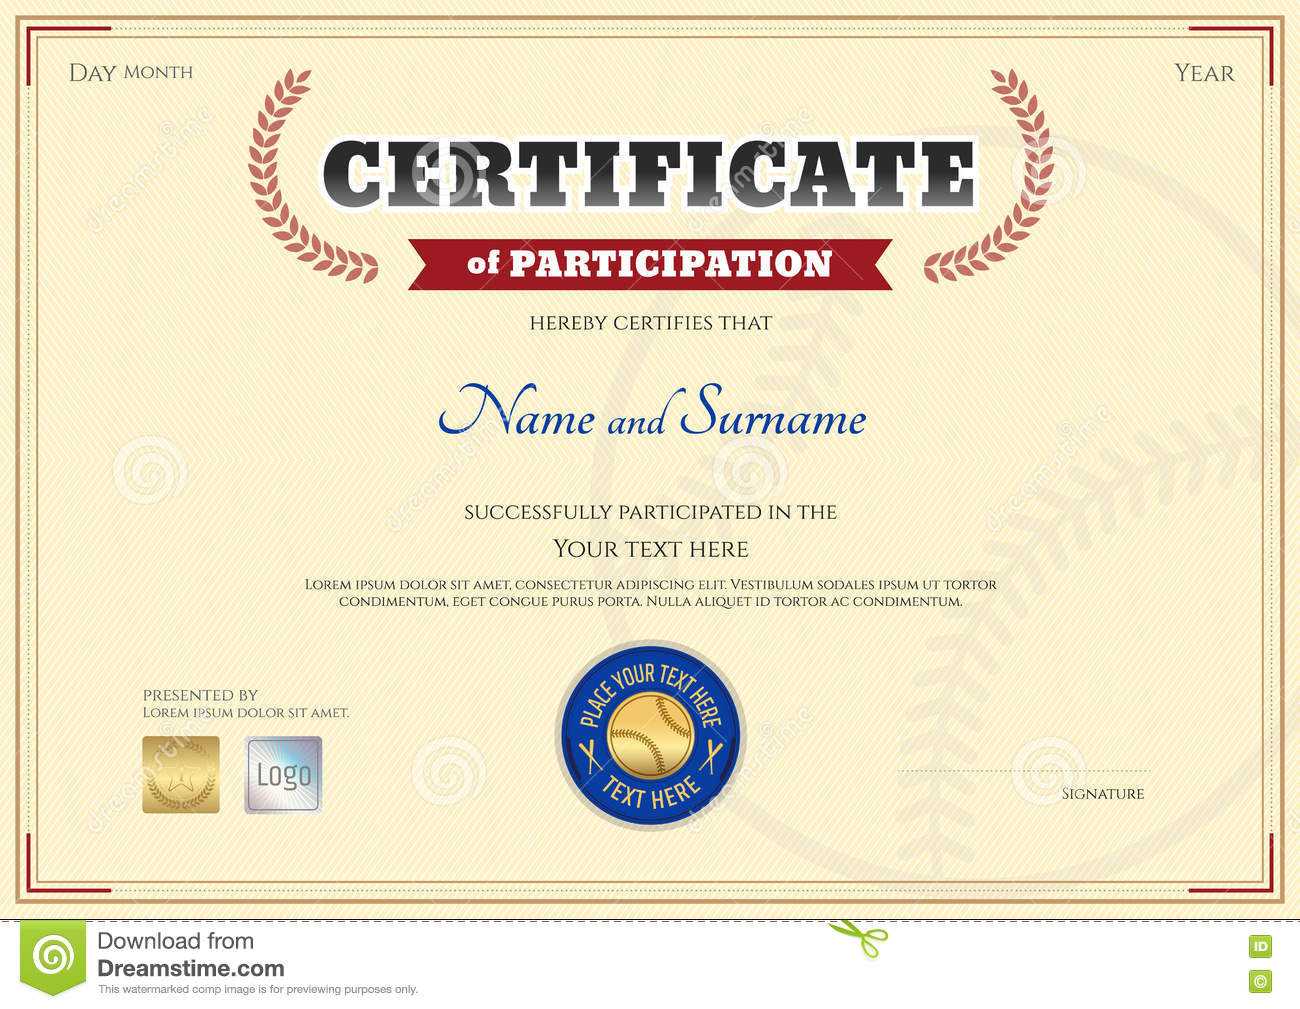 Certificate Of Participation Template In Baseball Sport In Templates For Certificates Of Participation